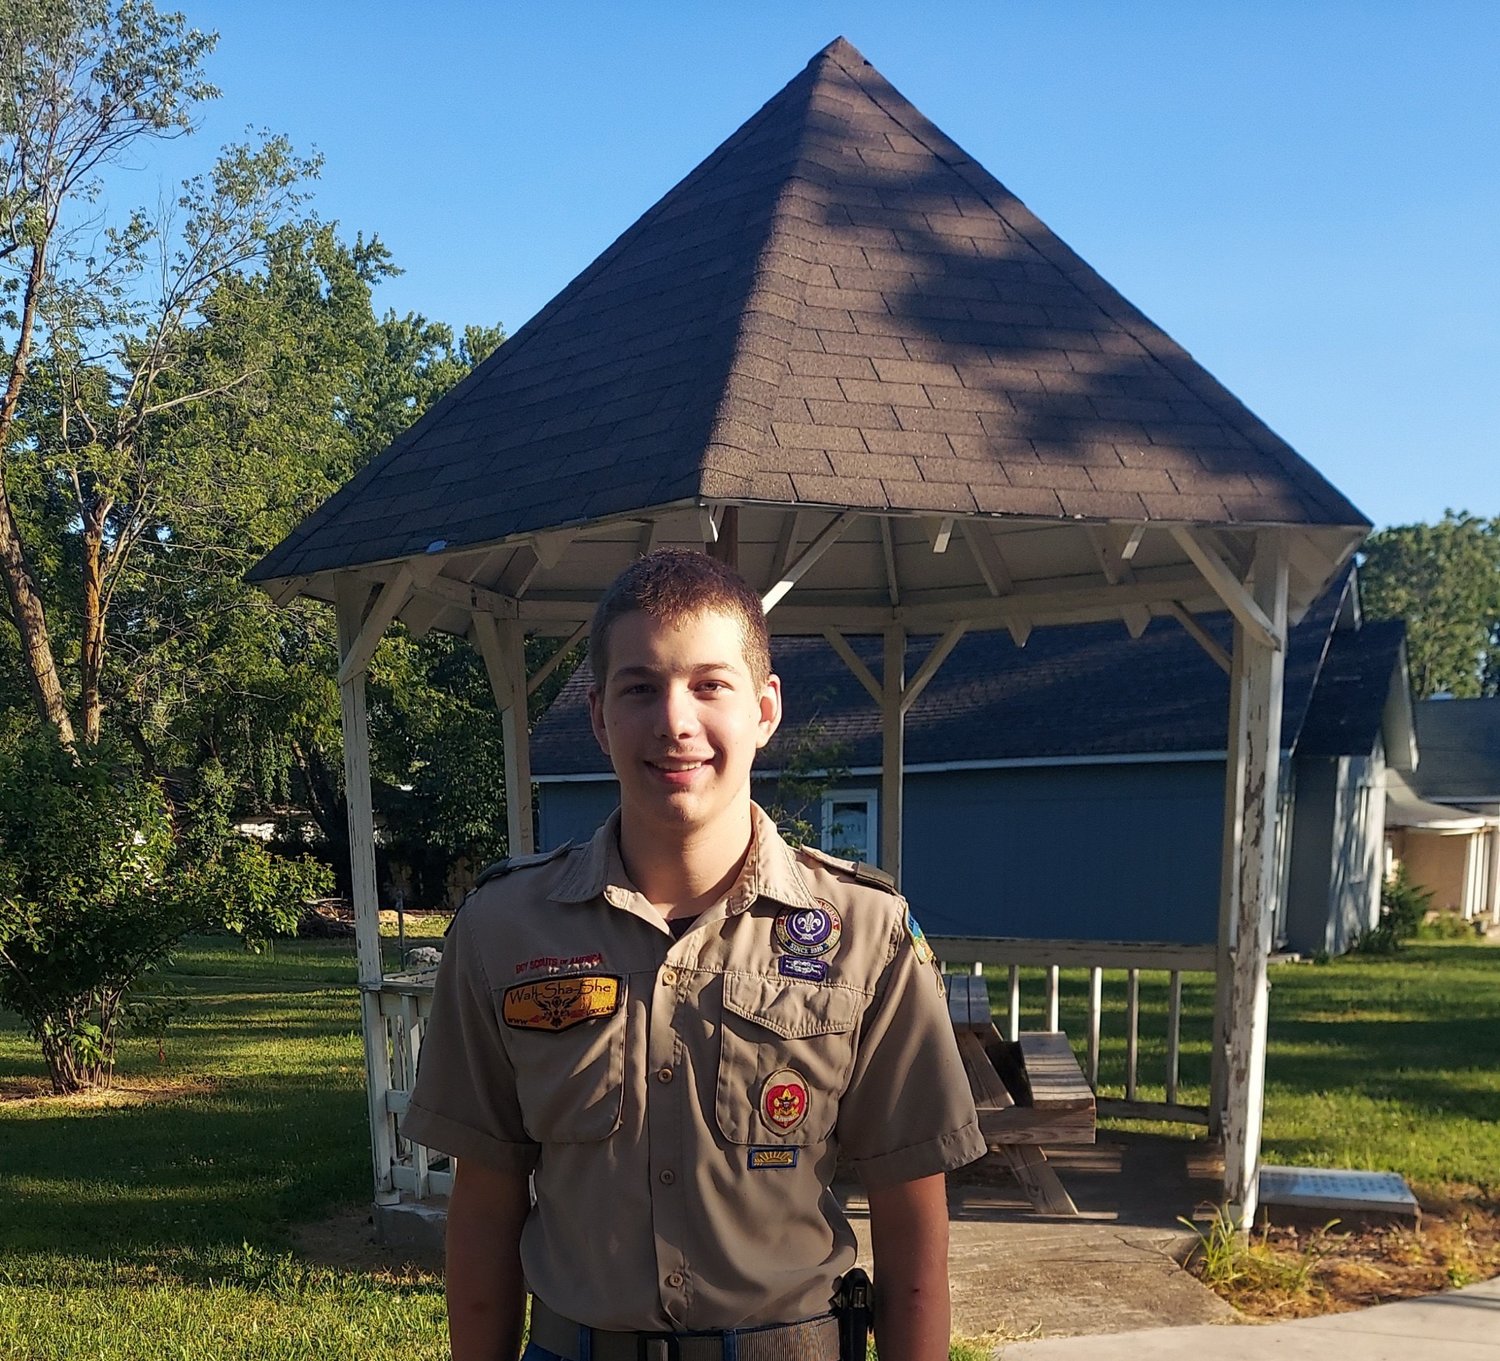 Logan Wynkoop stands in front of the gazebo at Hartley Park. Logan, along with his troop, plans to restore the gazebo as part of his community service project to earn his Eagle badge.